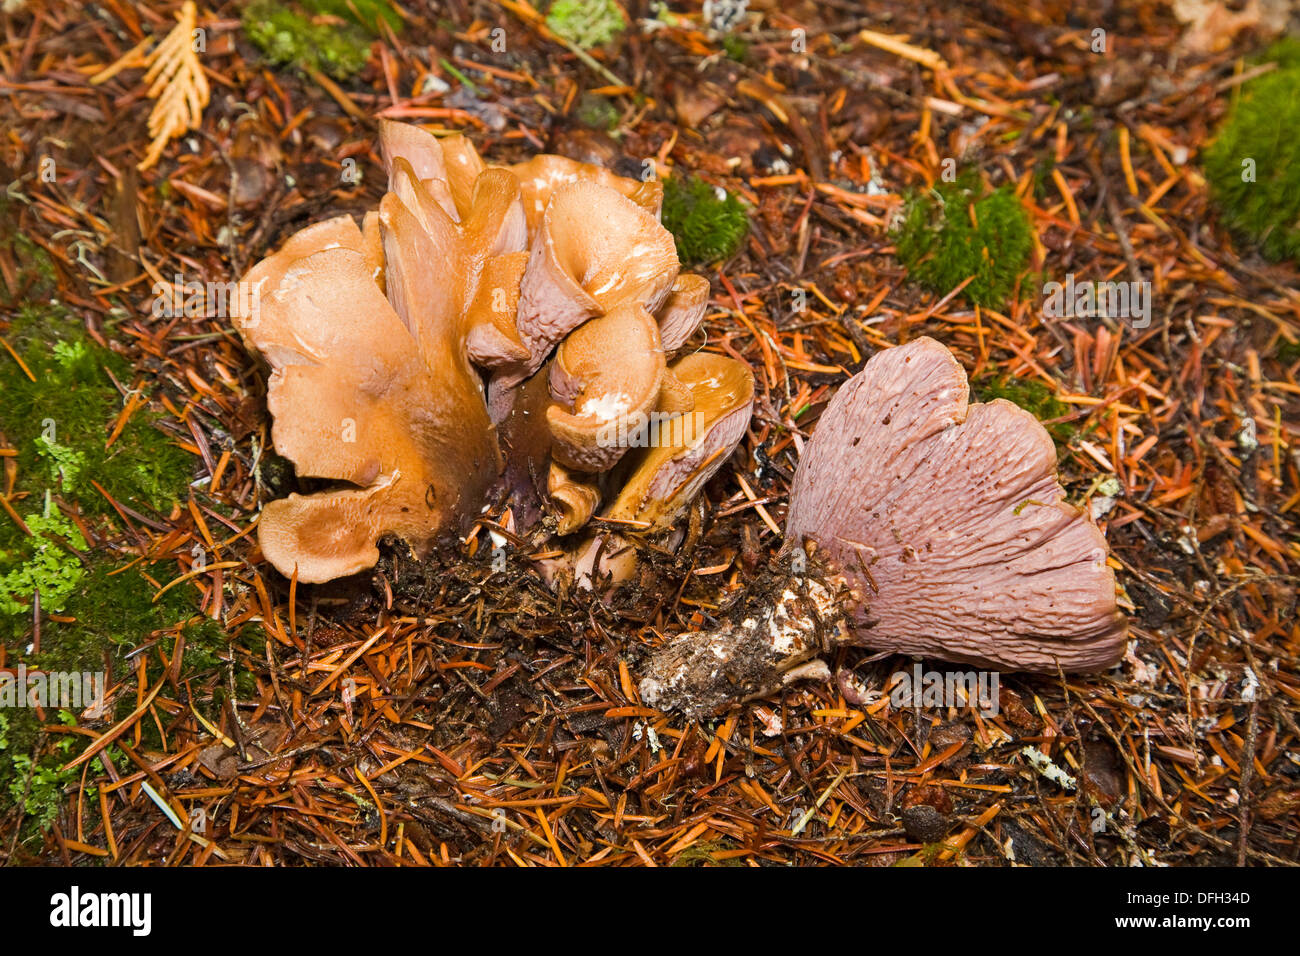 A wild edible mushroom or fungus known as gomphus clavcatus or pig's ear. Stock Photo